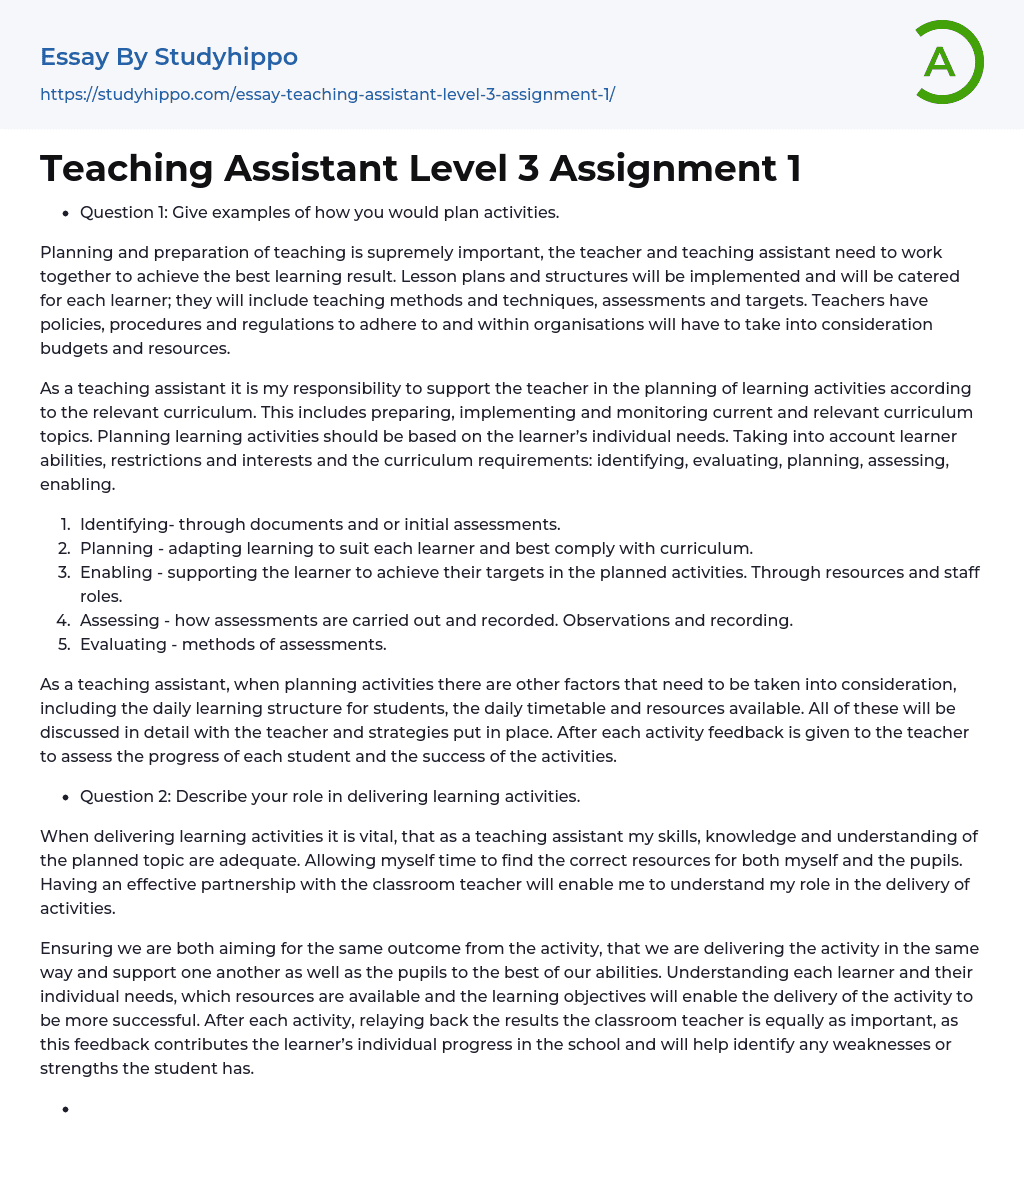 Teaching Assistant Level 3 Assignment 1 Essay Example